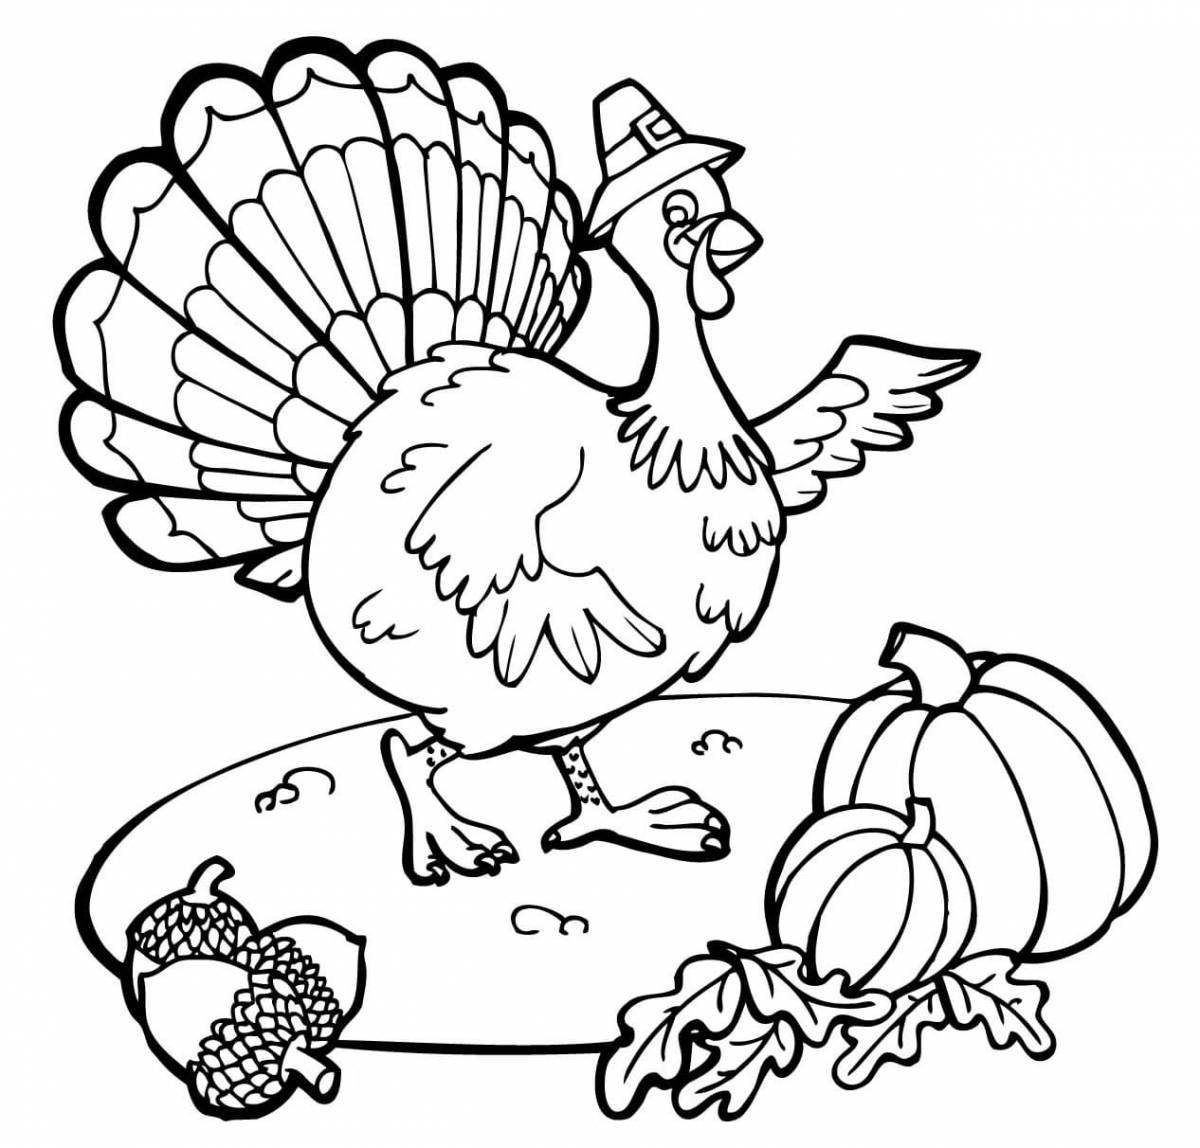 Playful poultry coloring page for kids